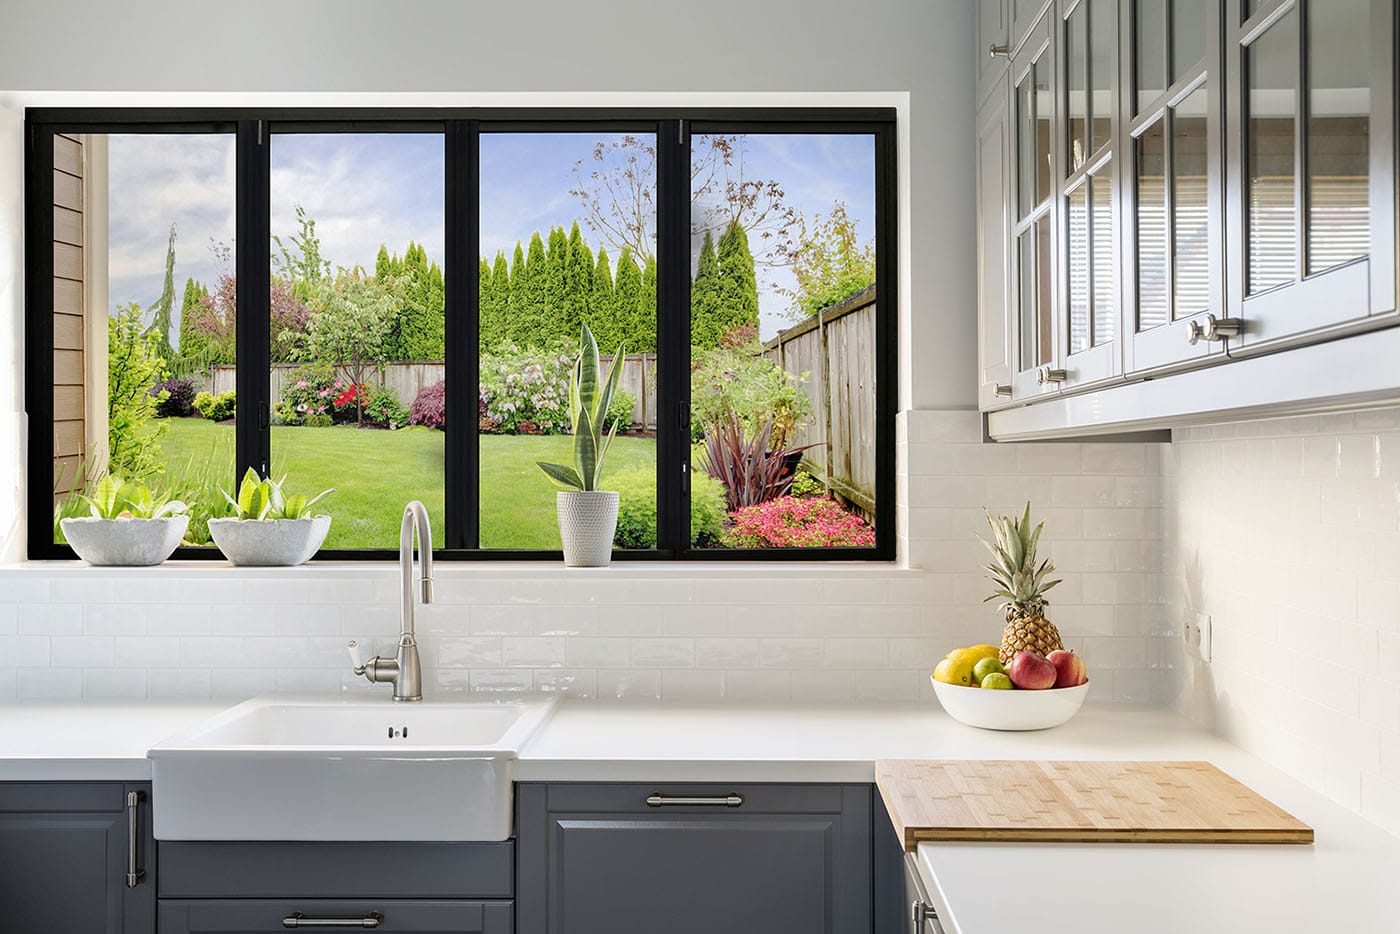 Adding a Pass-thru Kitchen Serving Window to Create the Perfect Indoor/Outdoor Entertaining Space